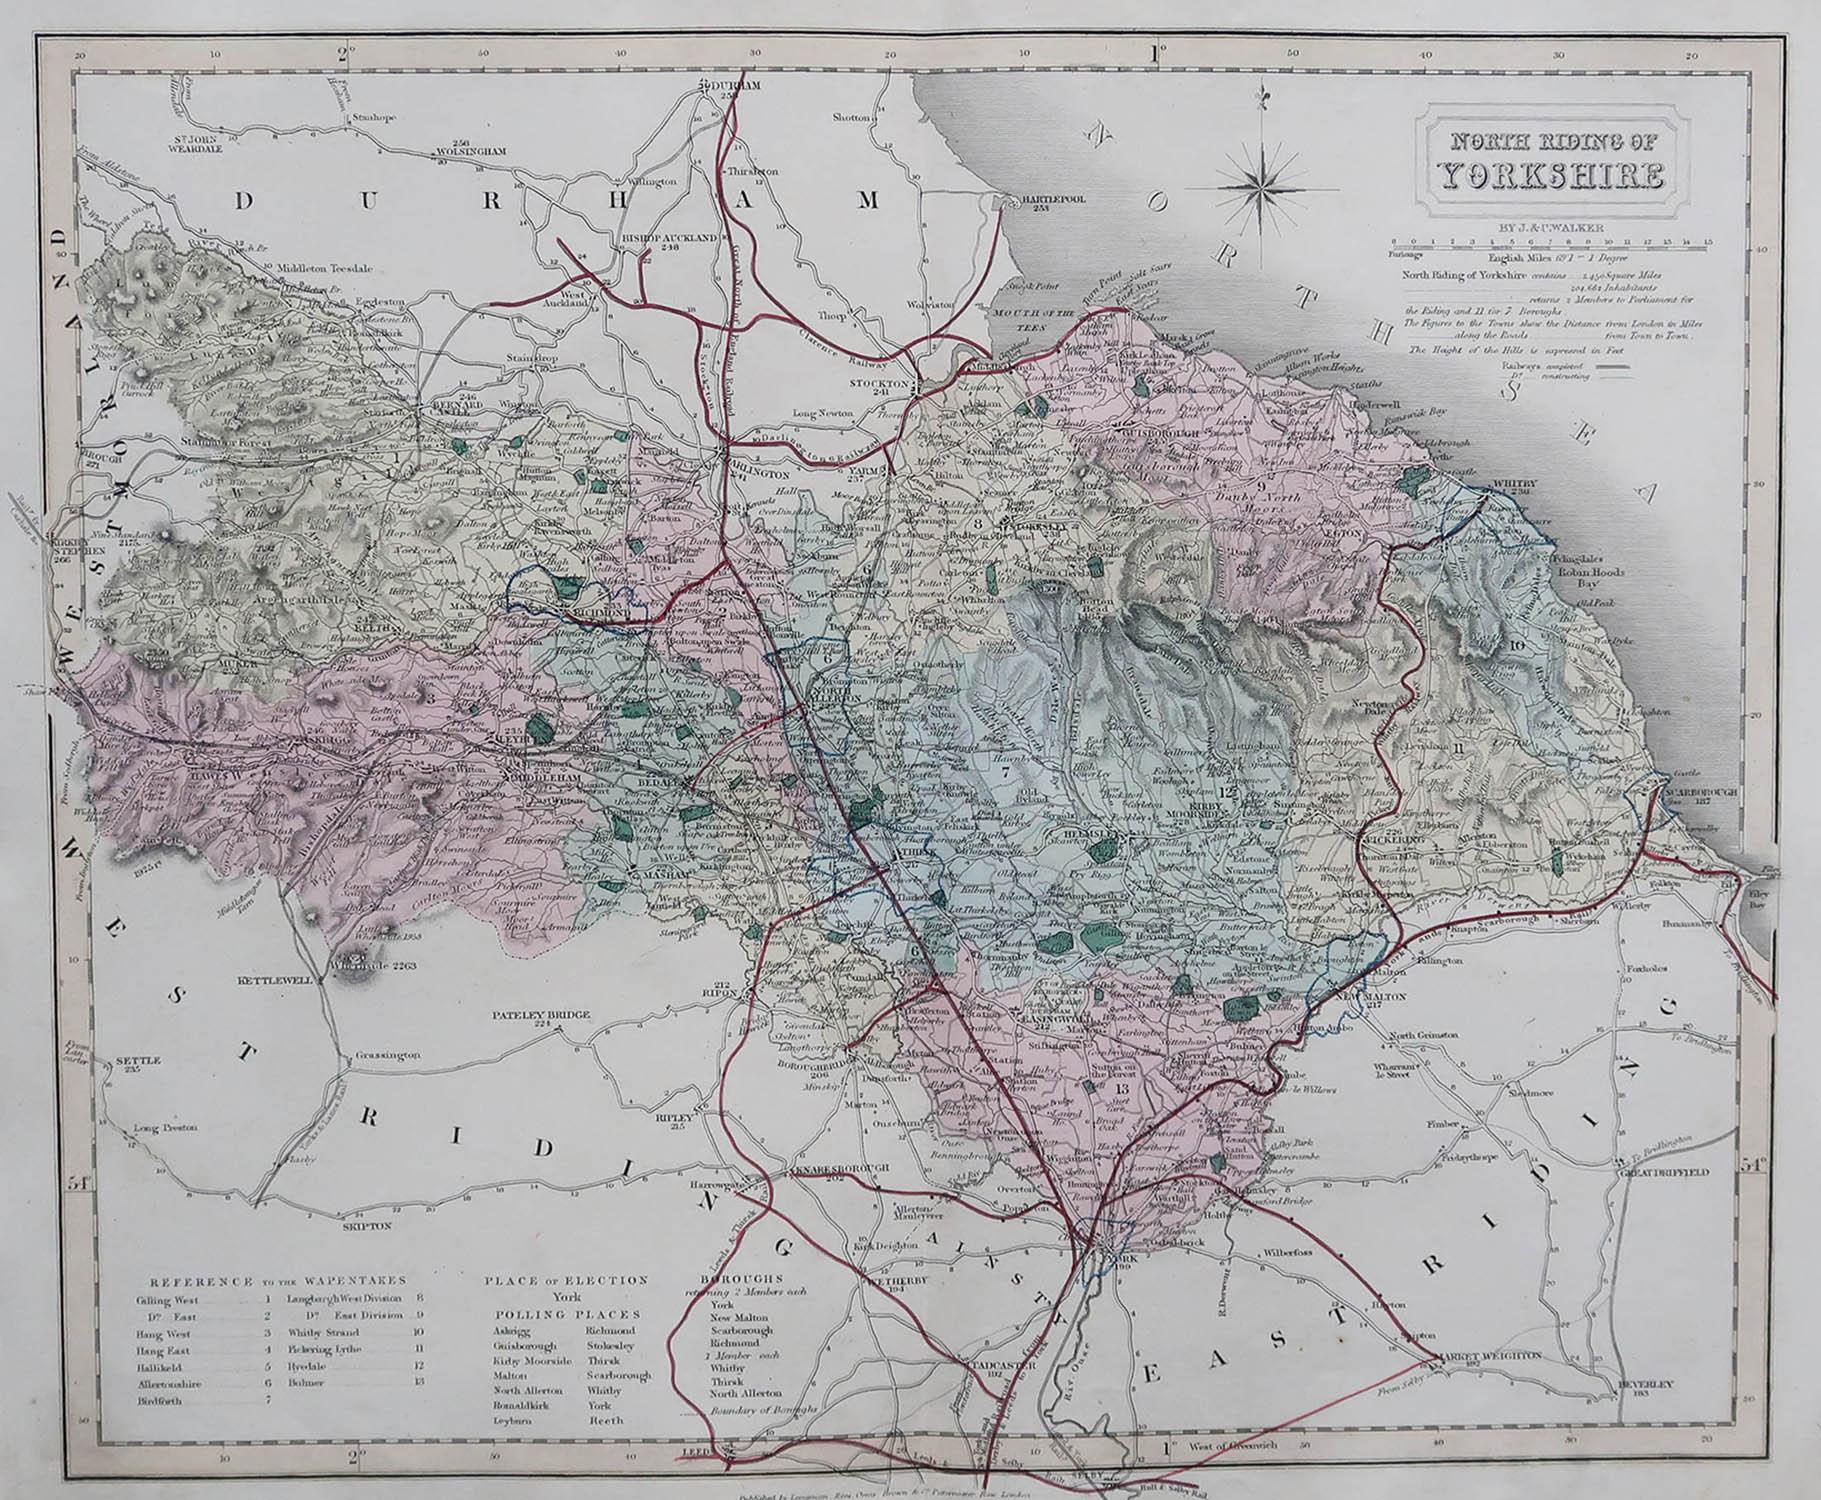 Great map of North Yorkshire

Original colour

By J & C Walker

Published by Longman, Rees, Orme, Brown & Co. 1851

Unframed.




